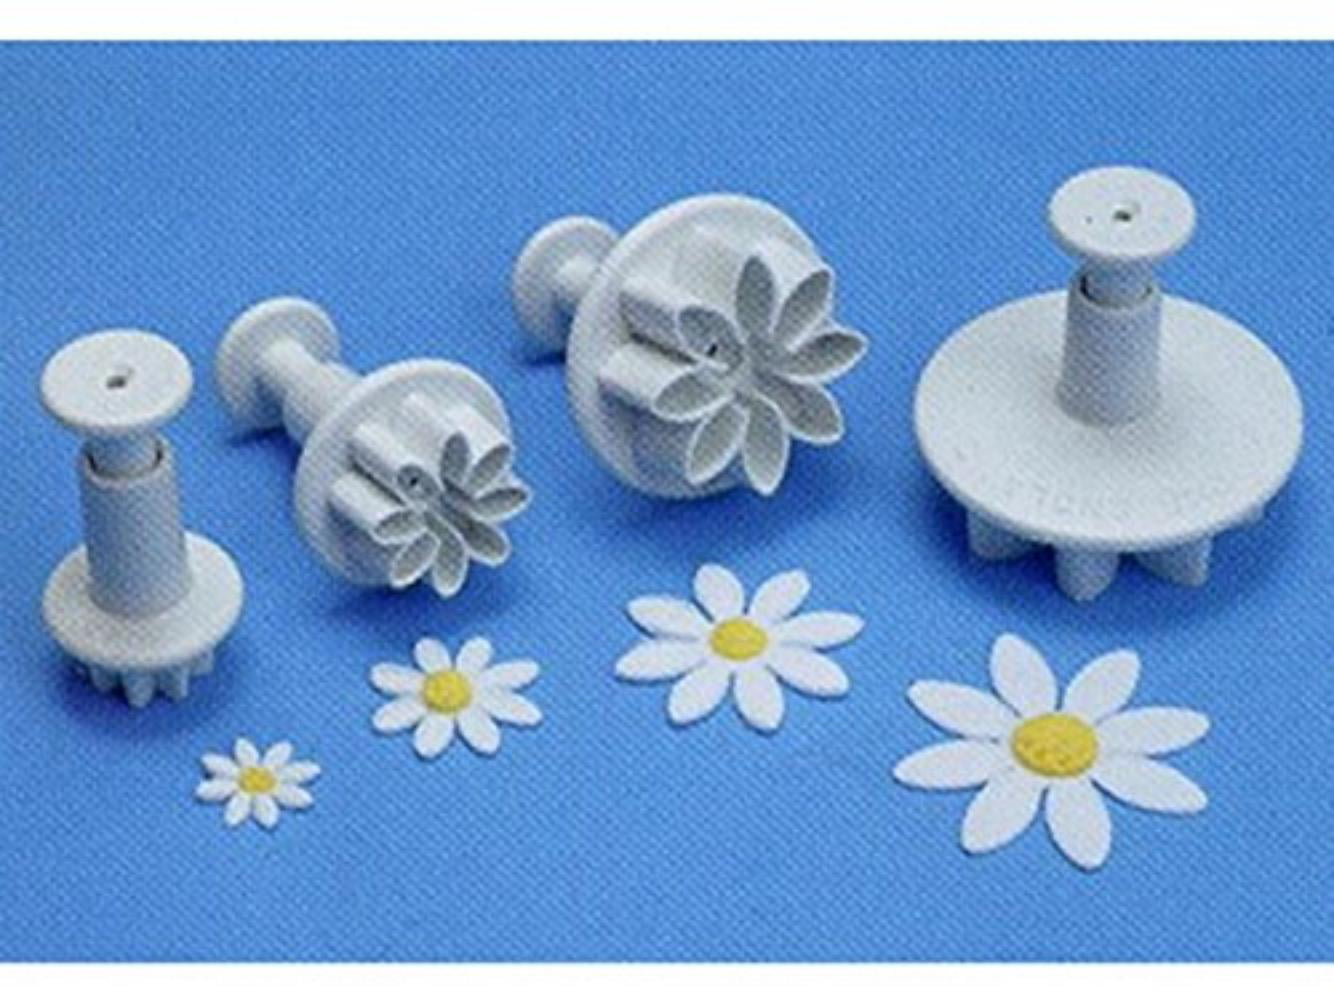 Details about   PME VEINED LILLY Flower Plastic Icing Plunger Plunger Cutter Sugarcraft Tool 